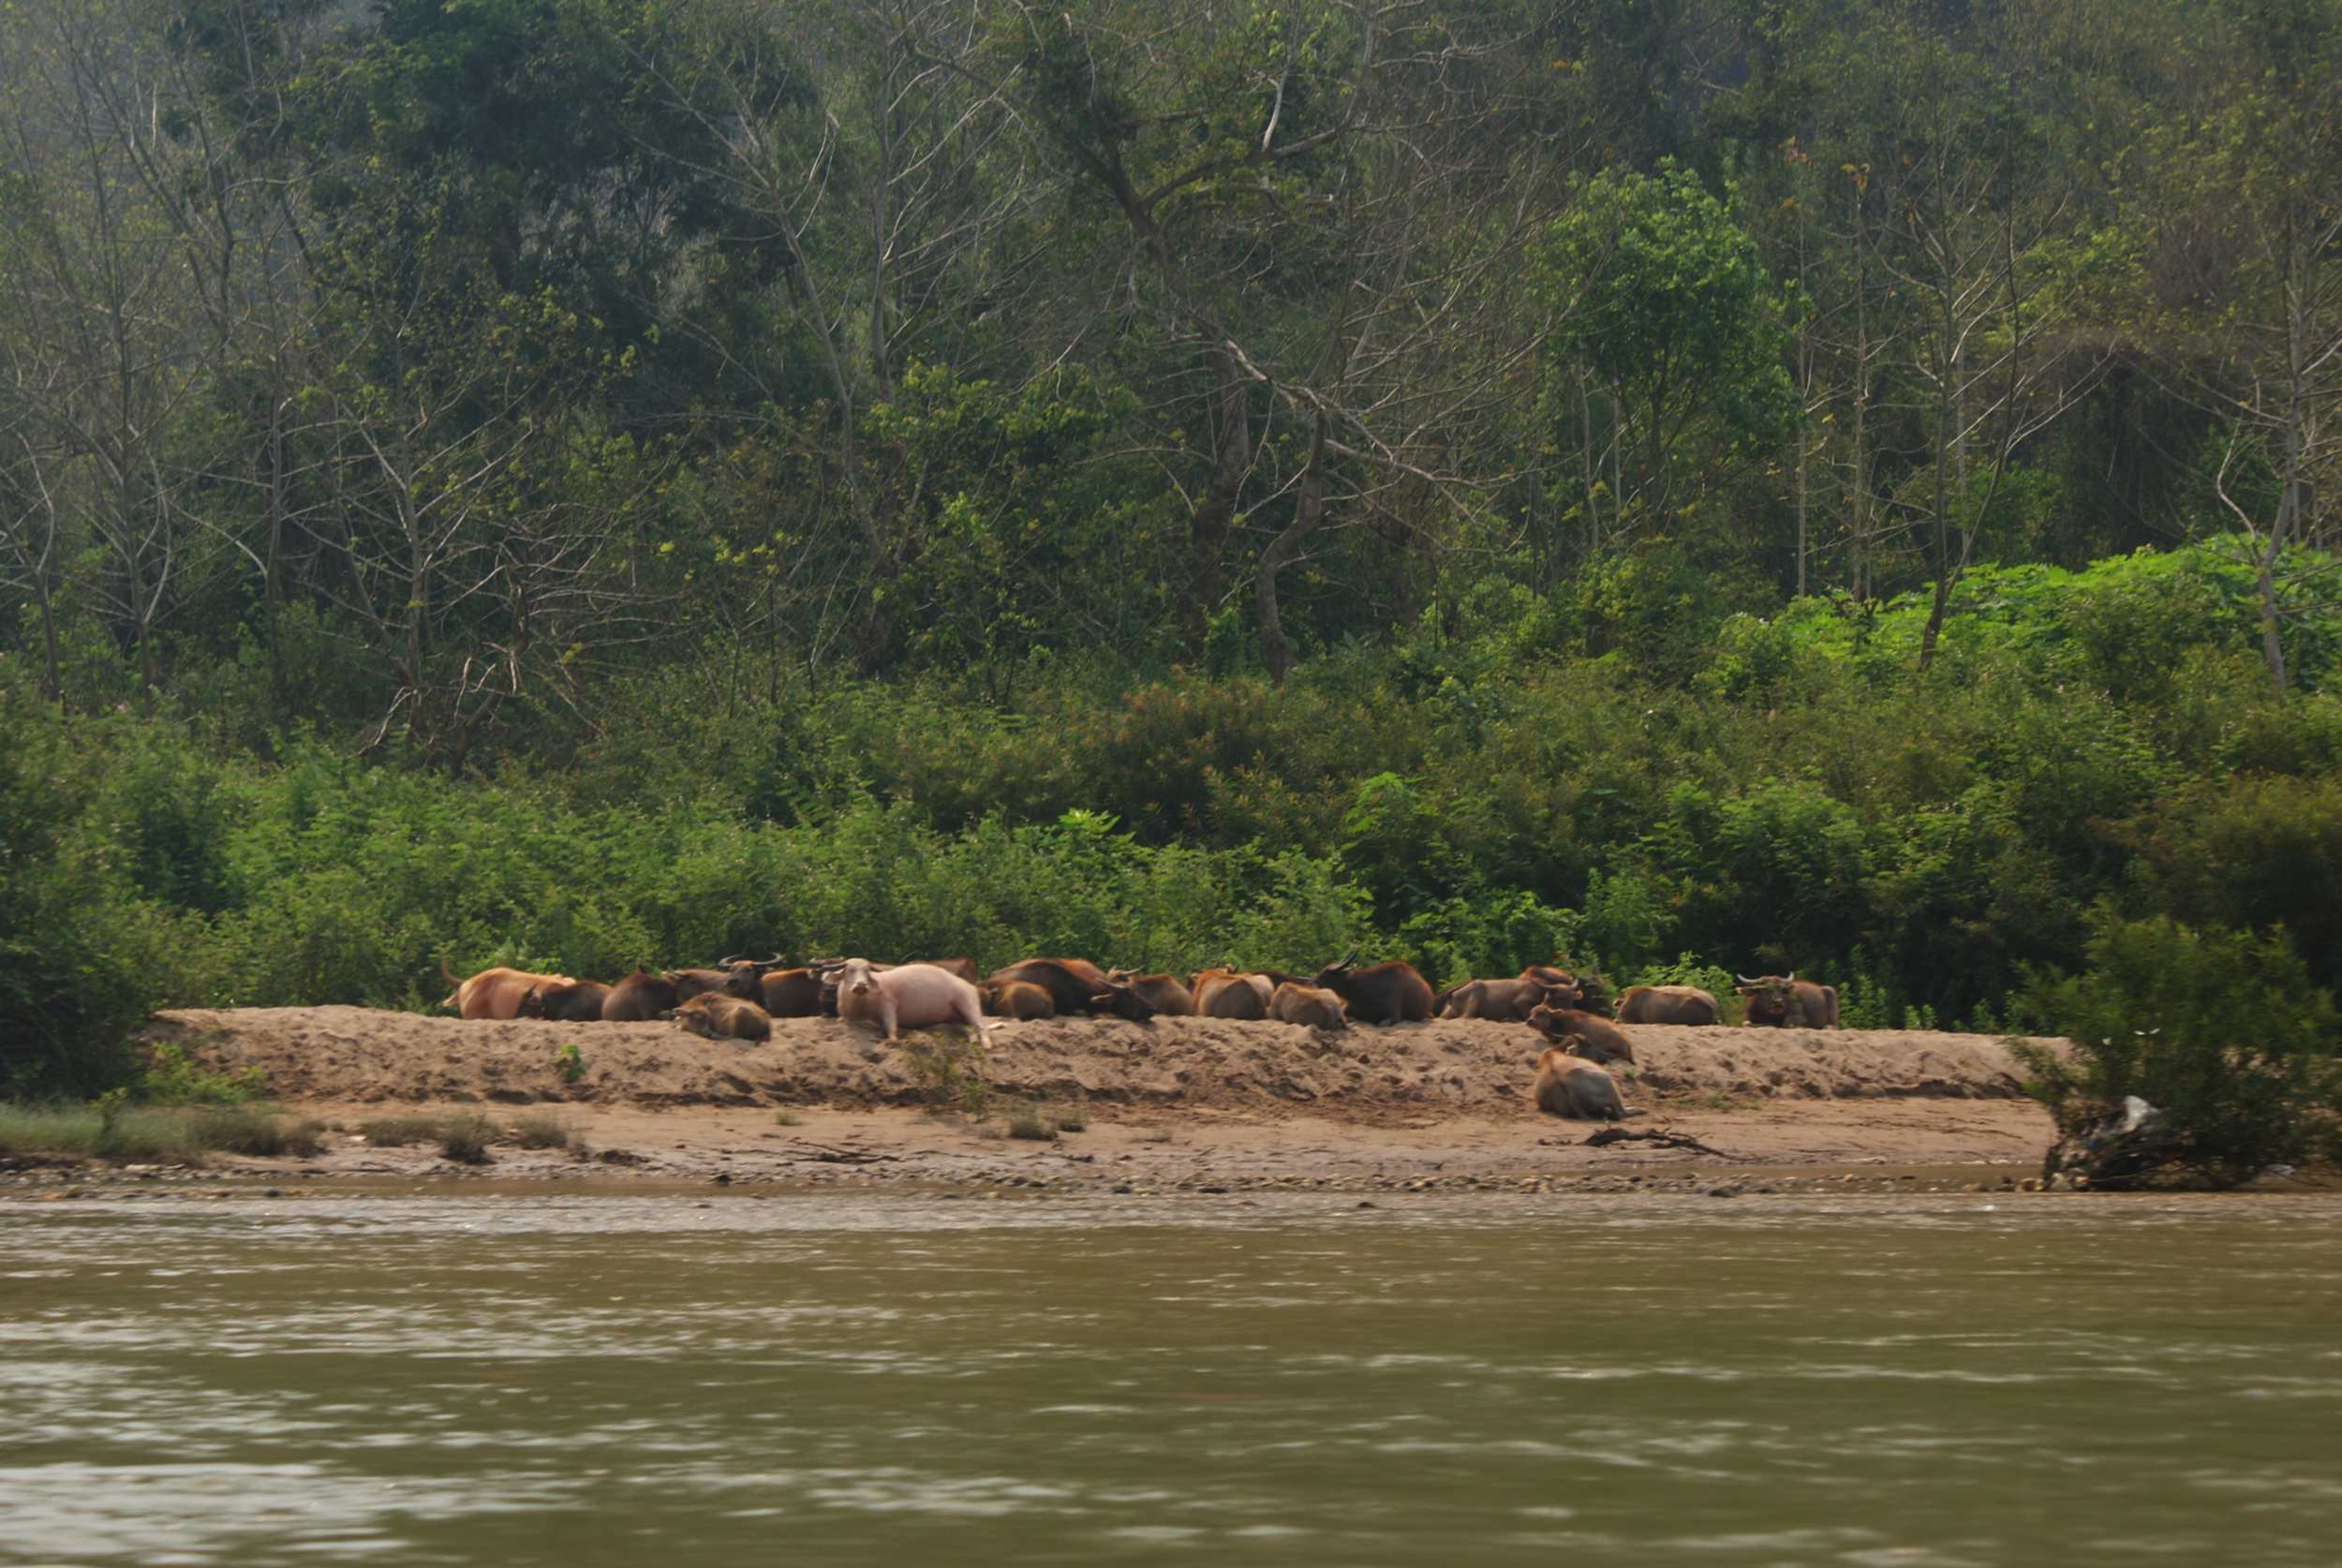 Water buffalo resting on the river bank